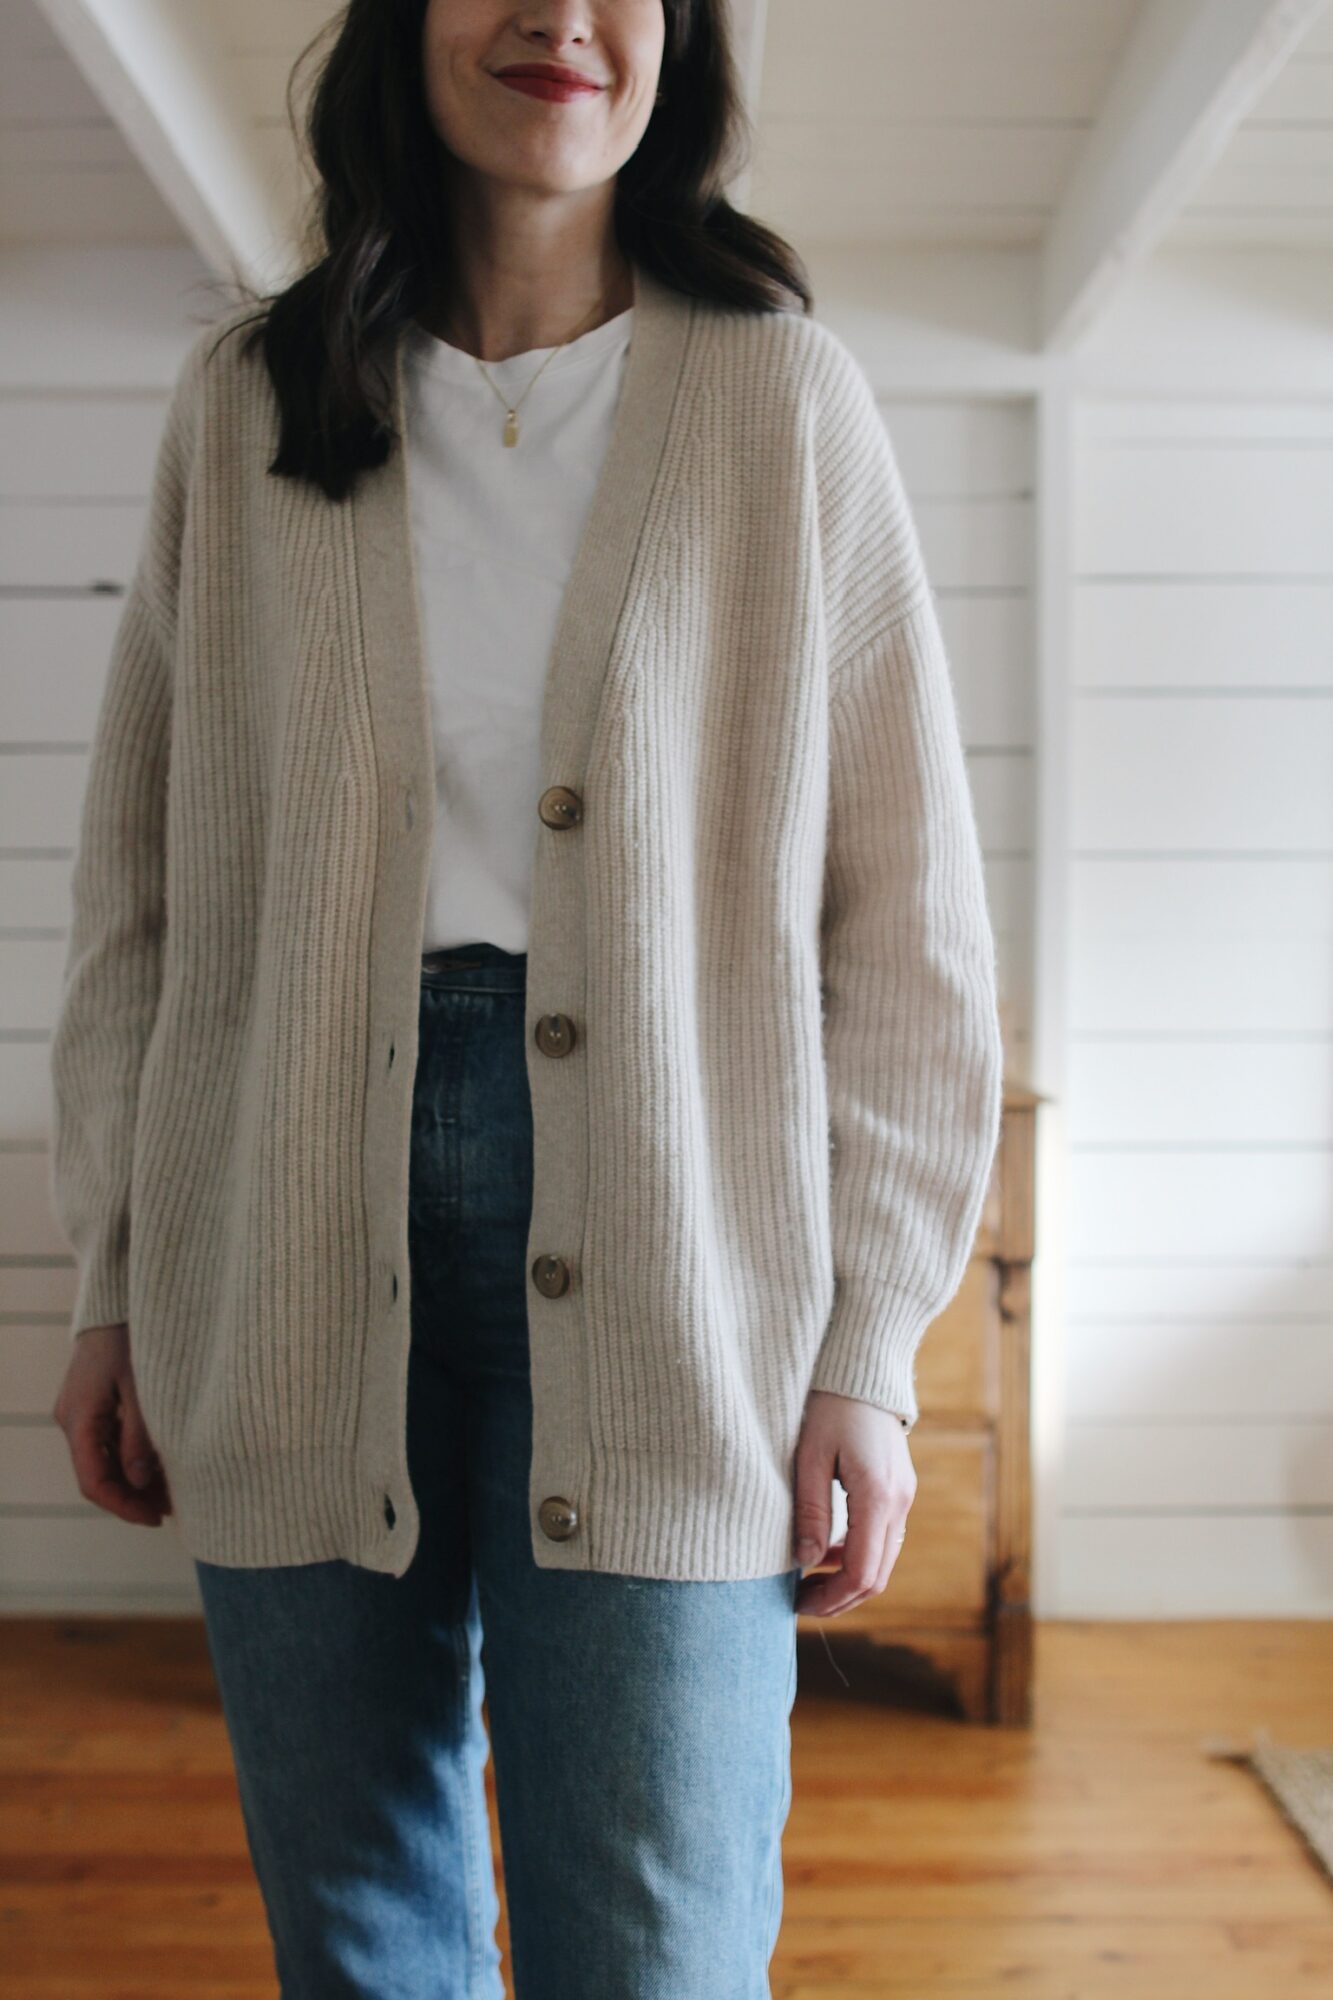 STYLE BEE - 2 YEARS IN THE COCOON CARDIGAN BY JENNI KAYNE (+ SIMILAR OPTIONS FOR LESS)